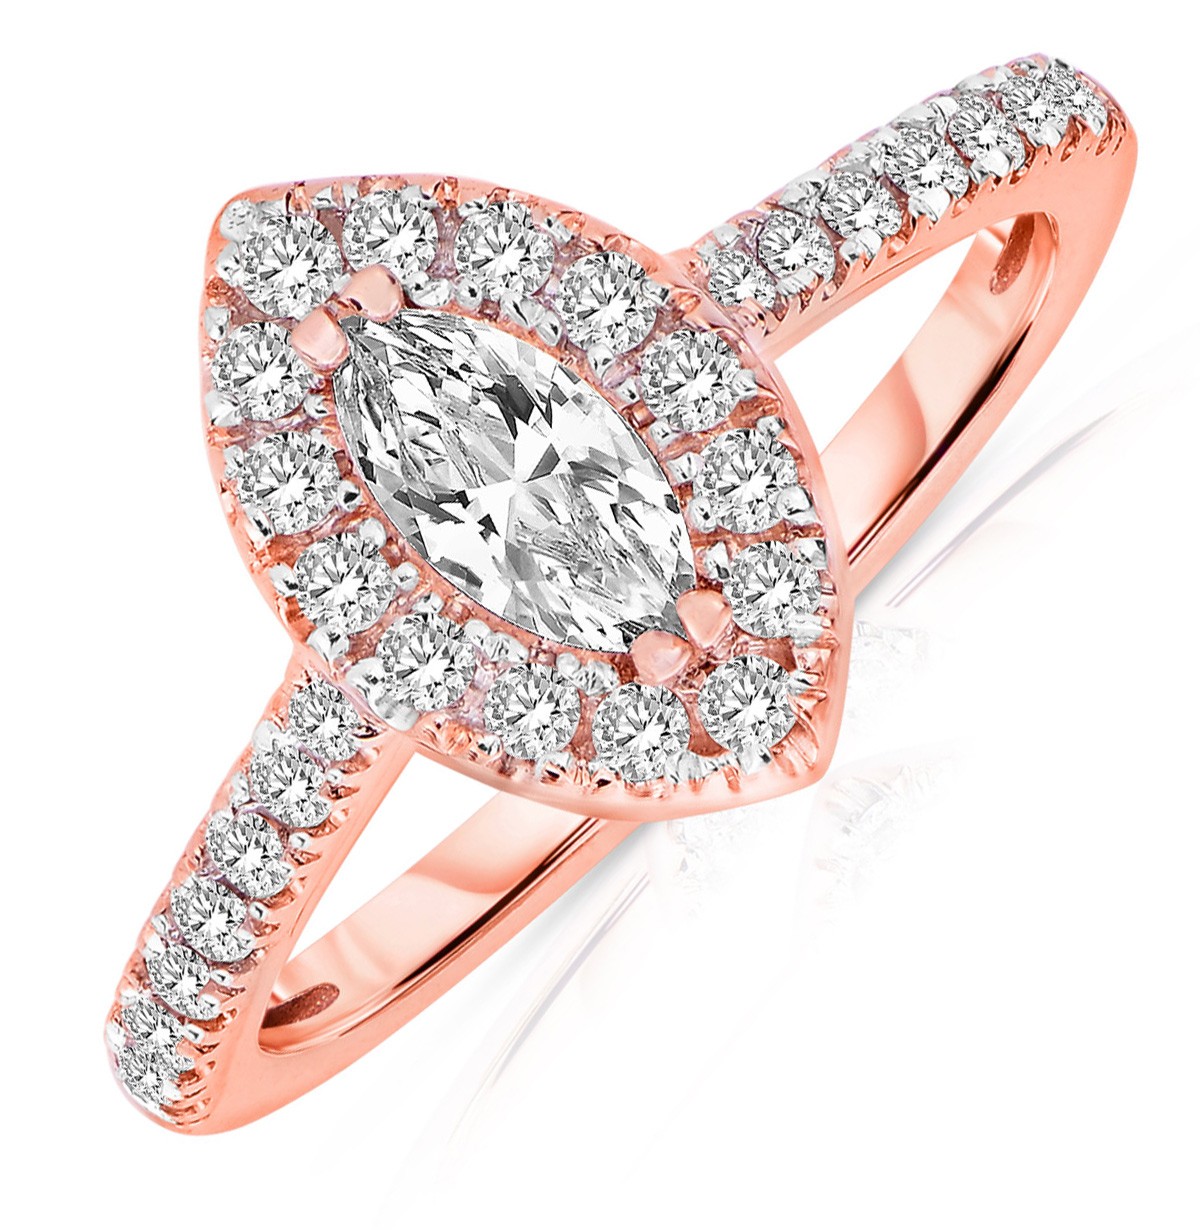 Half Carat Marquise Cut Halo Diamond Engagement Ring In Rose Gold